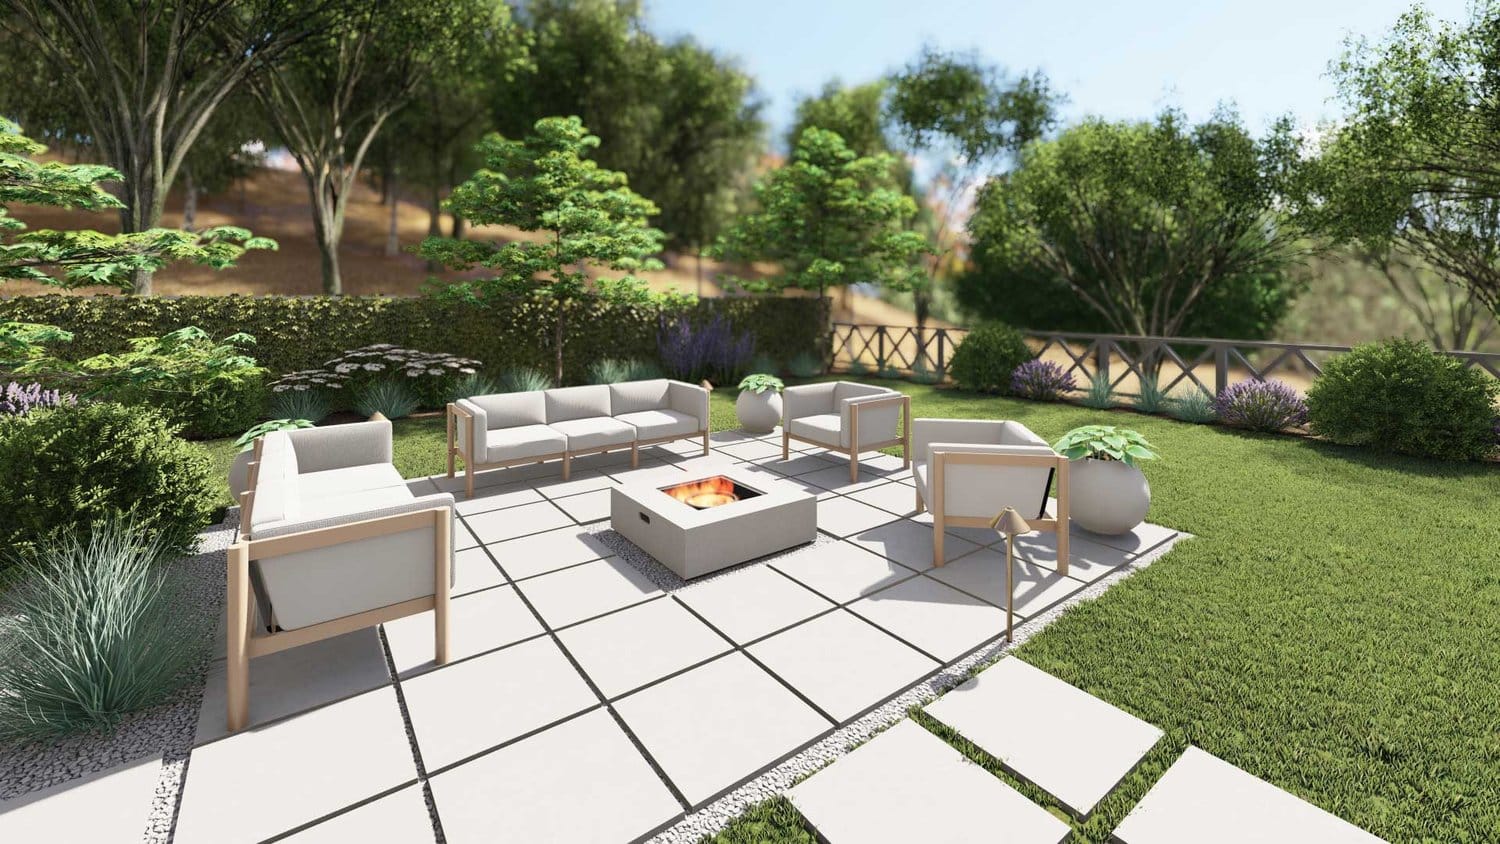 New Canaan patio design with paver and a fire pit with beautiful plants surrounding